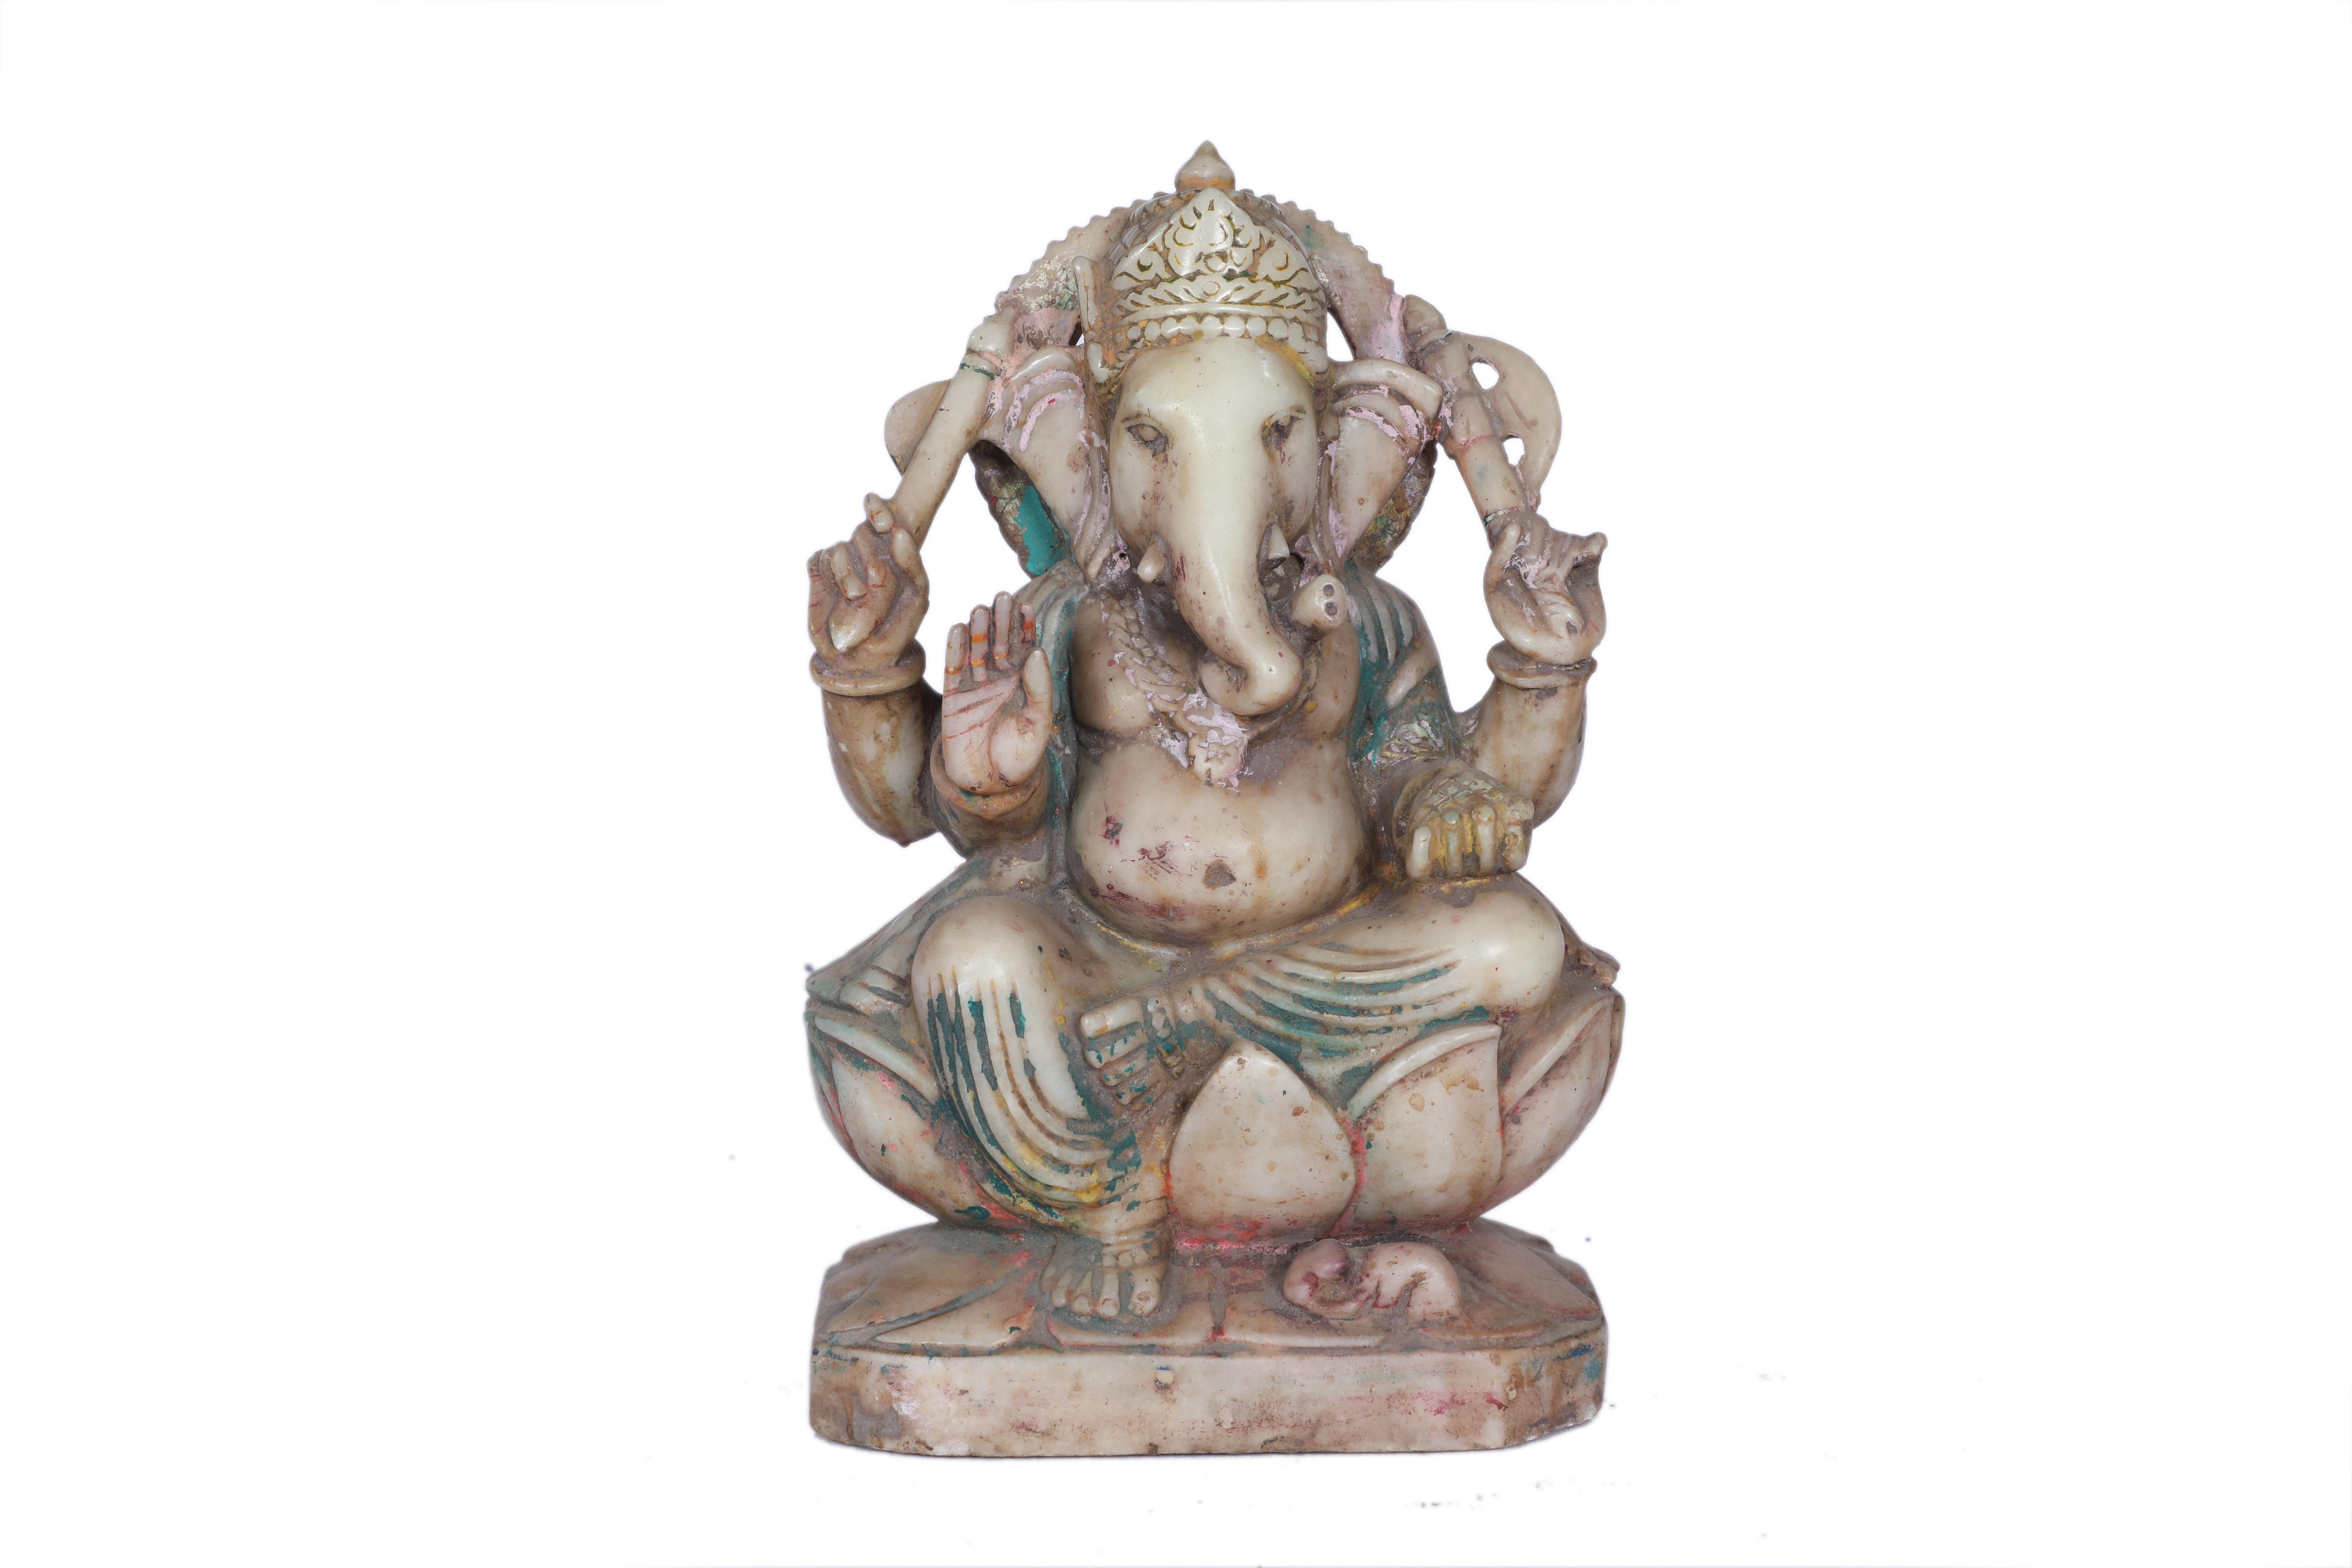 A wonderful example of Ganesh, Hinduism's most popular and revered deity.  The remover of obstacles, Ganesh is the God of wisdom, success and good luck.  This carved marble sculpture depicts all the expected symbolism--the axe to cut away ignorance,